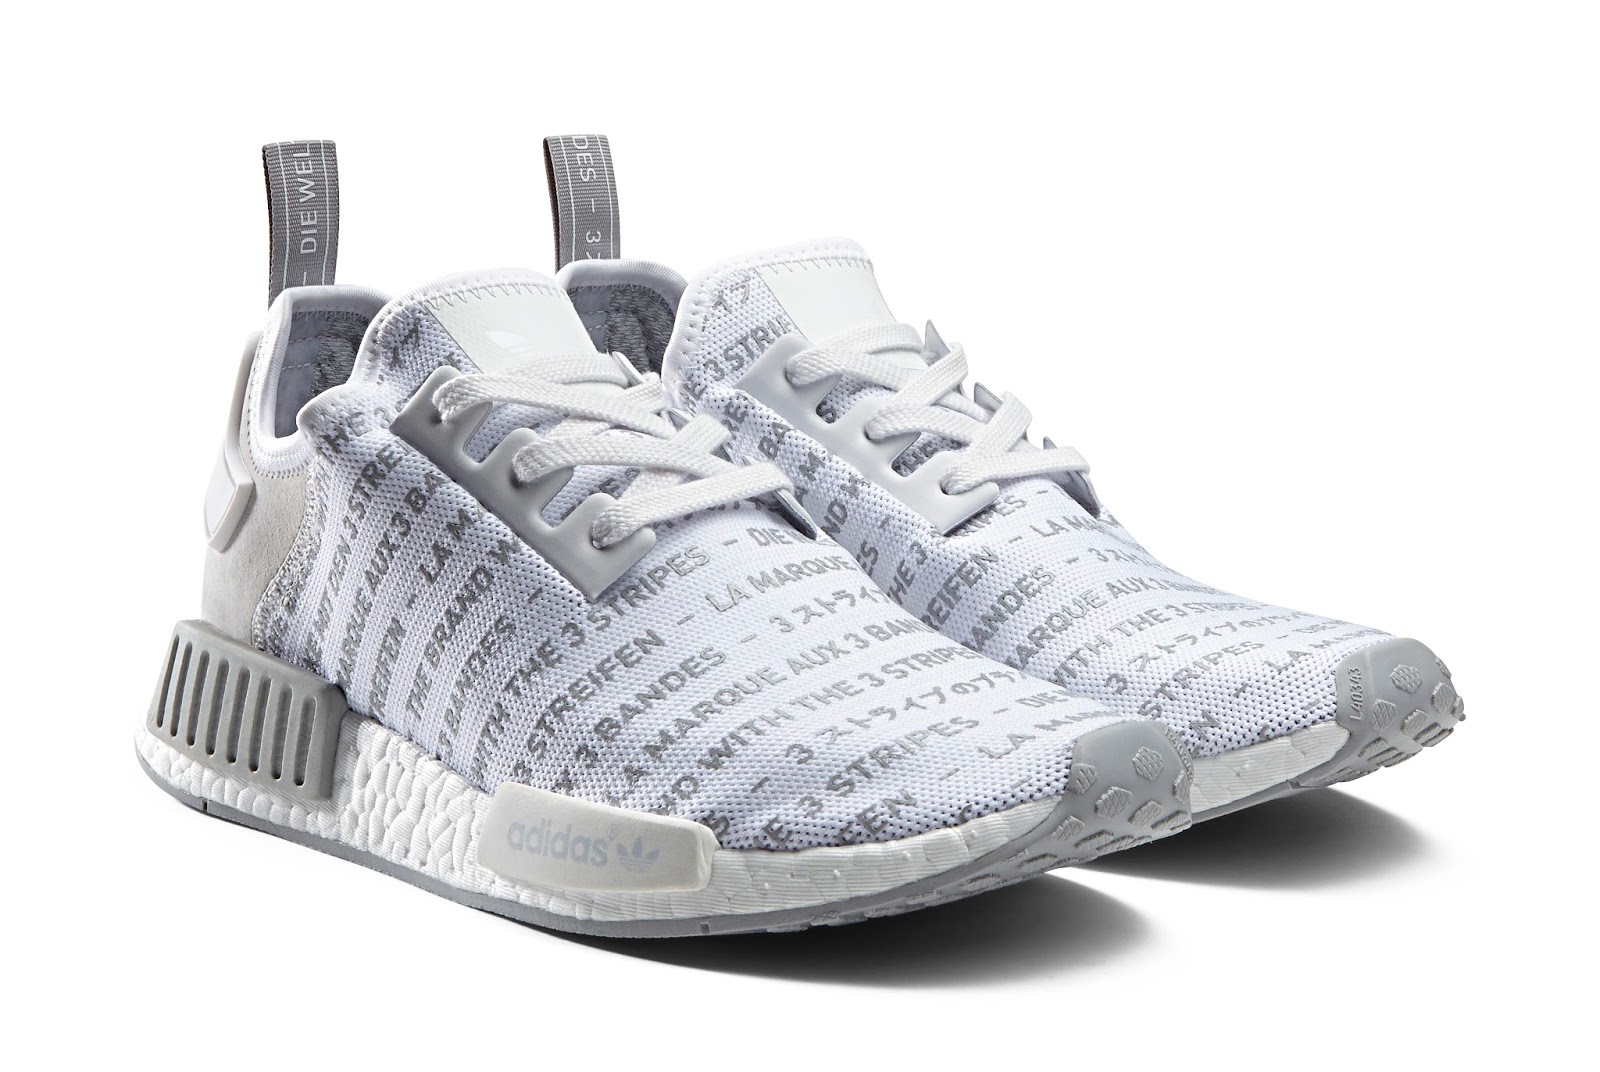 Brouwerij bestellen middag Swag Craze: First Look: adidas NMD Blackout/Whiteout Pack Which Drops On  Friday